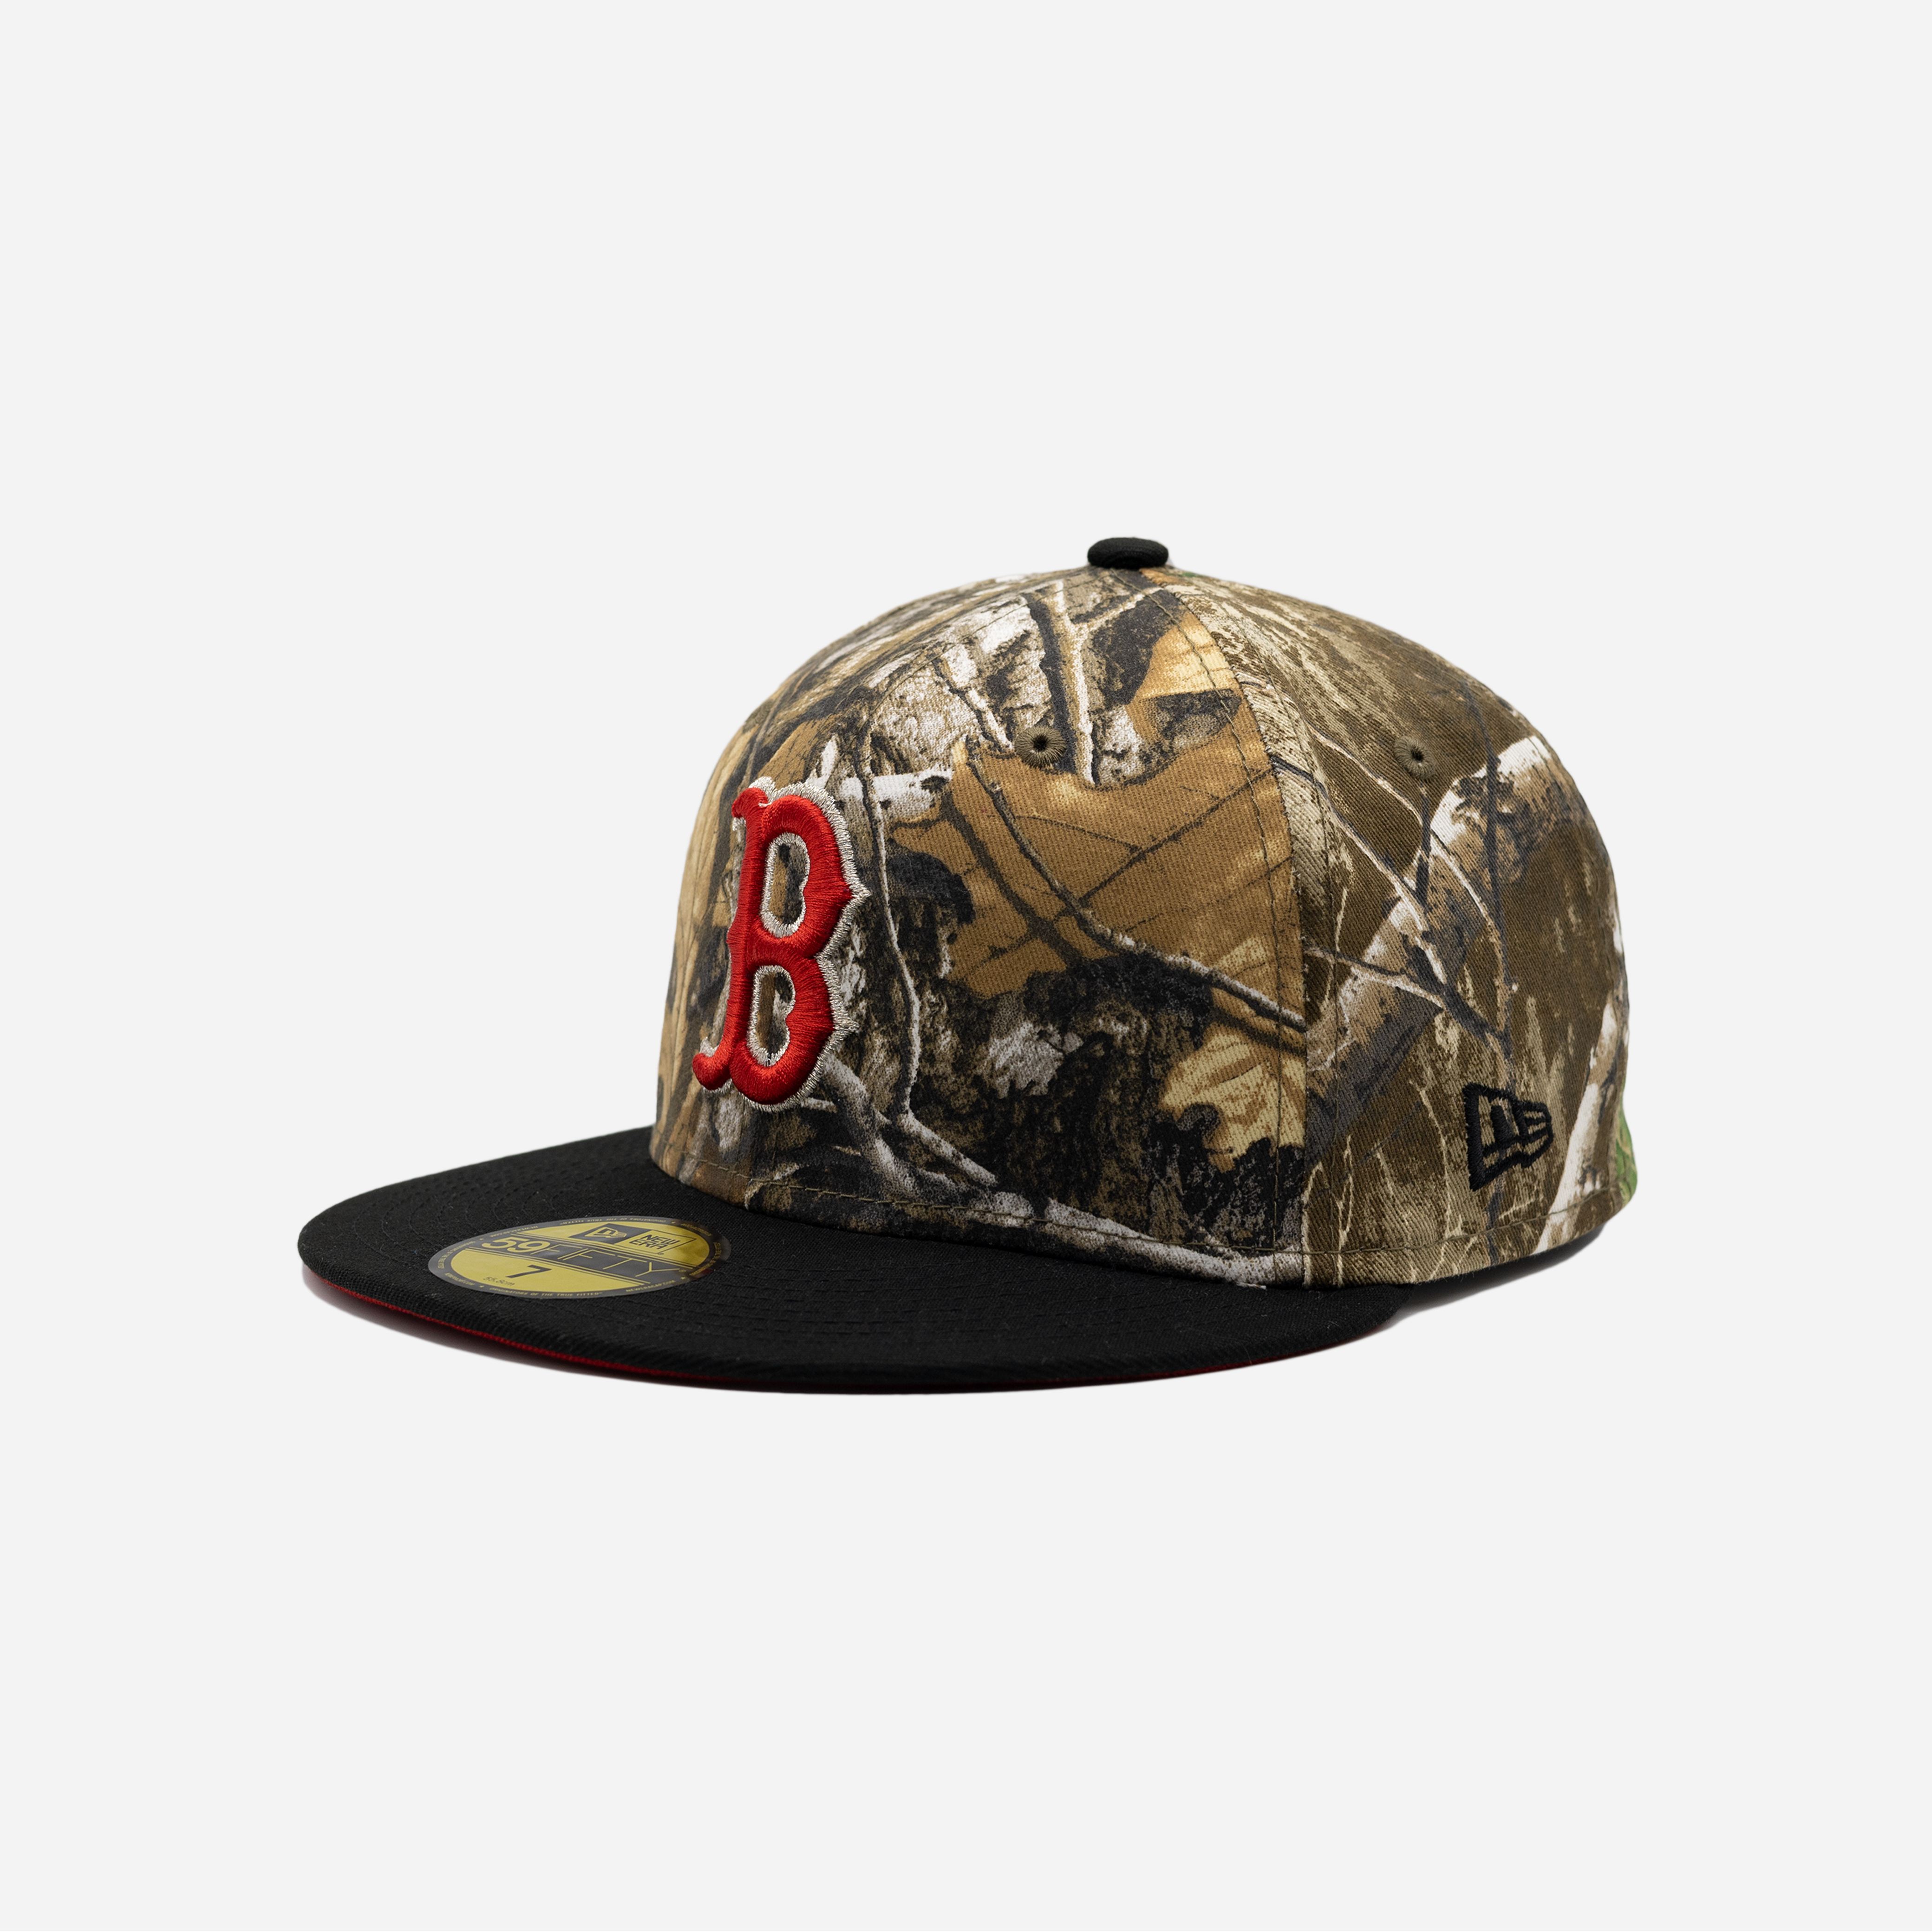 Red Sox to Wear Cap With Camouflage Logo to Honor Veterans (Photo